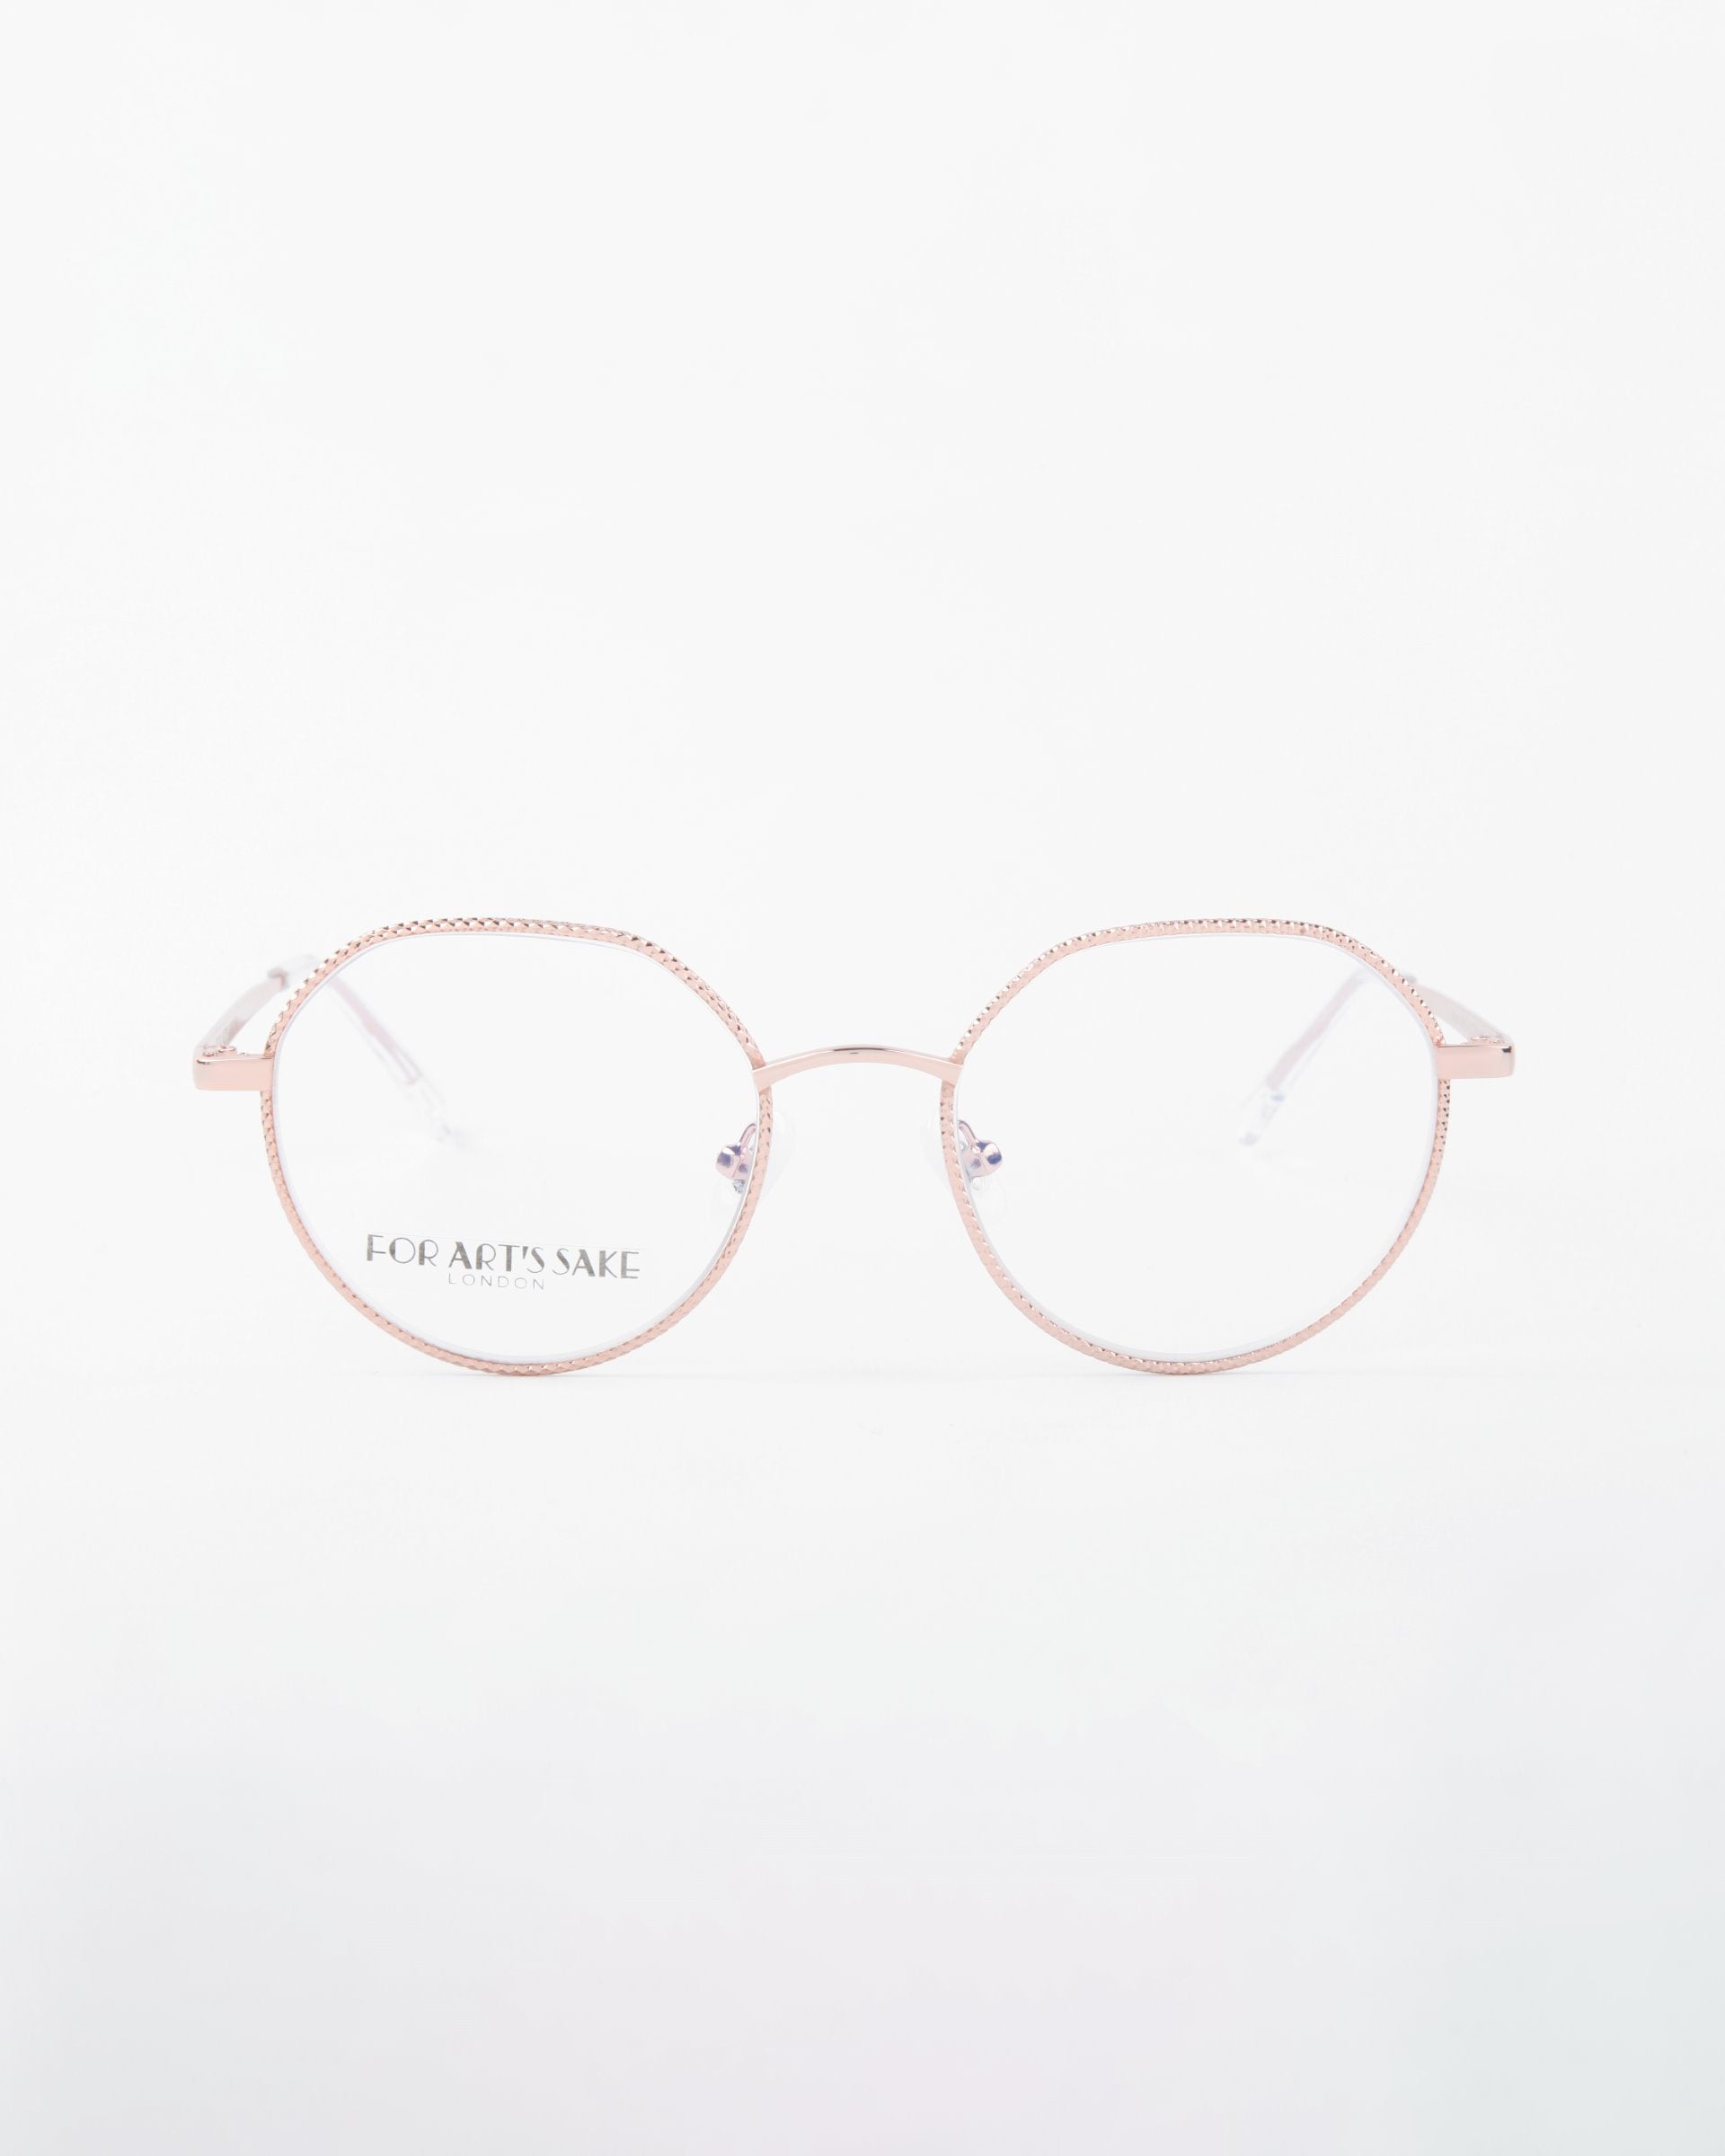 A pair of round eyeglasses with thin, light pink metal frames is displayed against a plain white background. The lenses feature a Blue Light Filter, and the brand name &quot;For Art&#39;s Sake®&quot; is visible on the left lens. The slender temples match the frame color perfectly. These eyeglasses are named Hope.